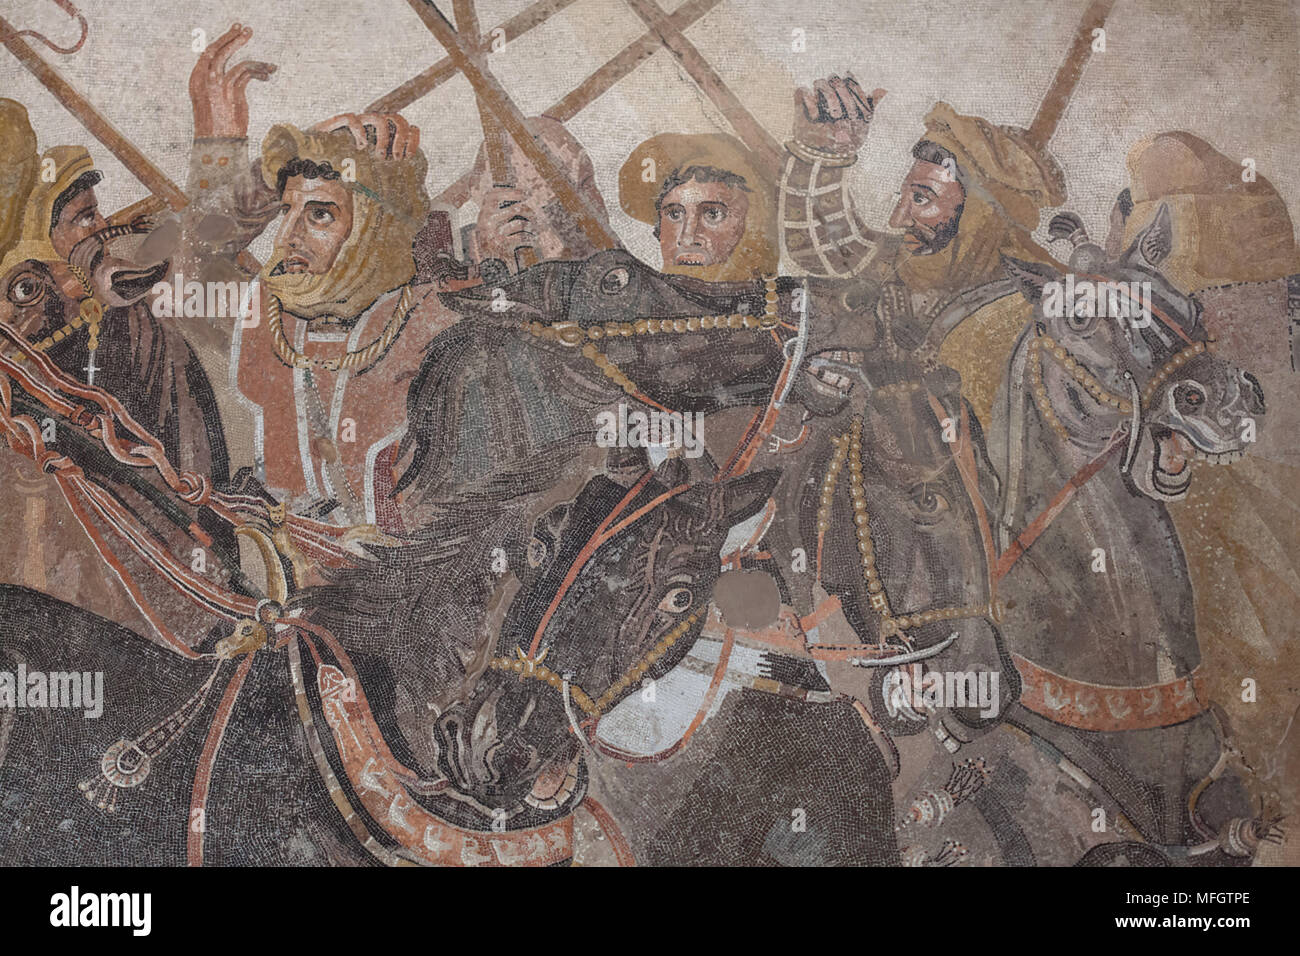 Persian warriors fighting during the battle between Alexander the Great and King Darius depicted in the Alexander Mosaic from the Casa del Fauno (House of the Faun) in Pompeii, now on display in the National Archaeological Museum (Museo Archeologico Nazionale di Napoli) in Naples, Campania, Italy. Alexander the Great is depicted attacking King Darius during one of decisive battles in the conquest of the East, probably the Battle of Issus (333 BC), the Battle of the Granicus River (334 BC) or the Battle of Gaugamela (331 BC). Stock Photo